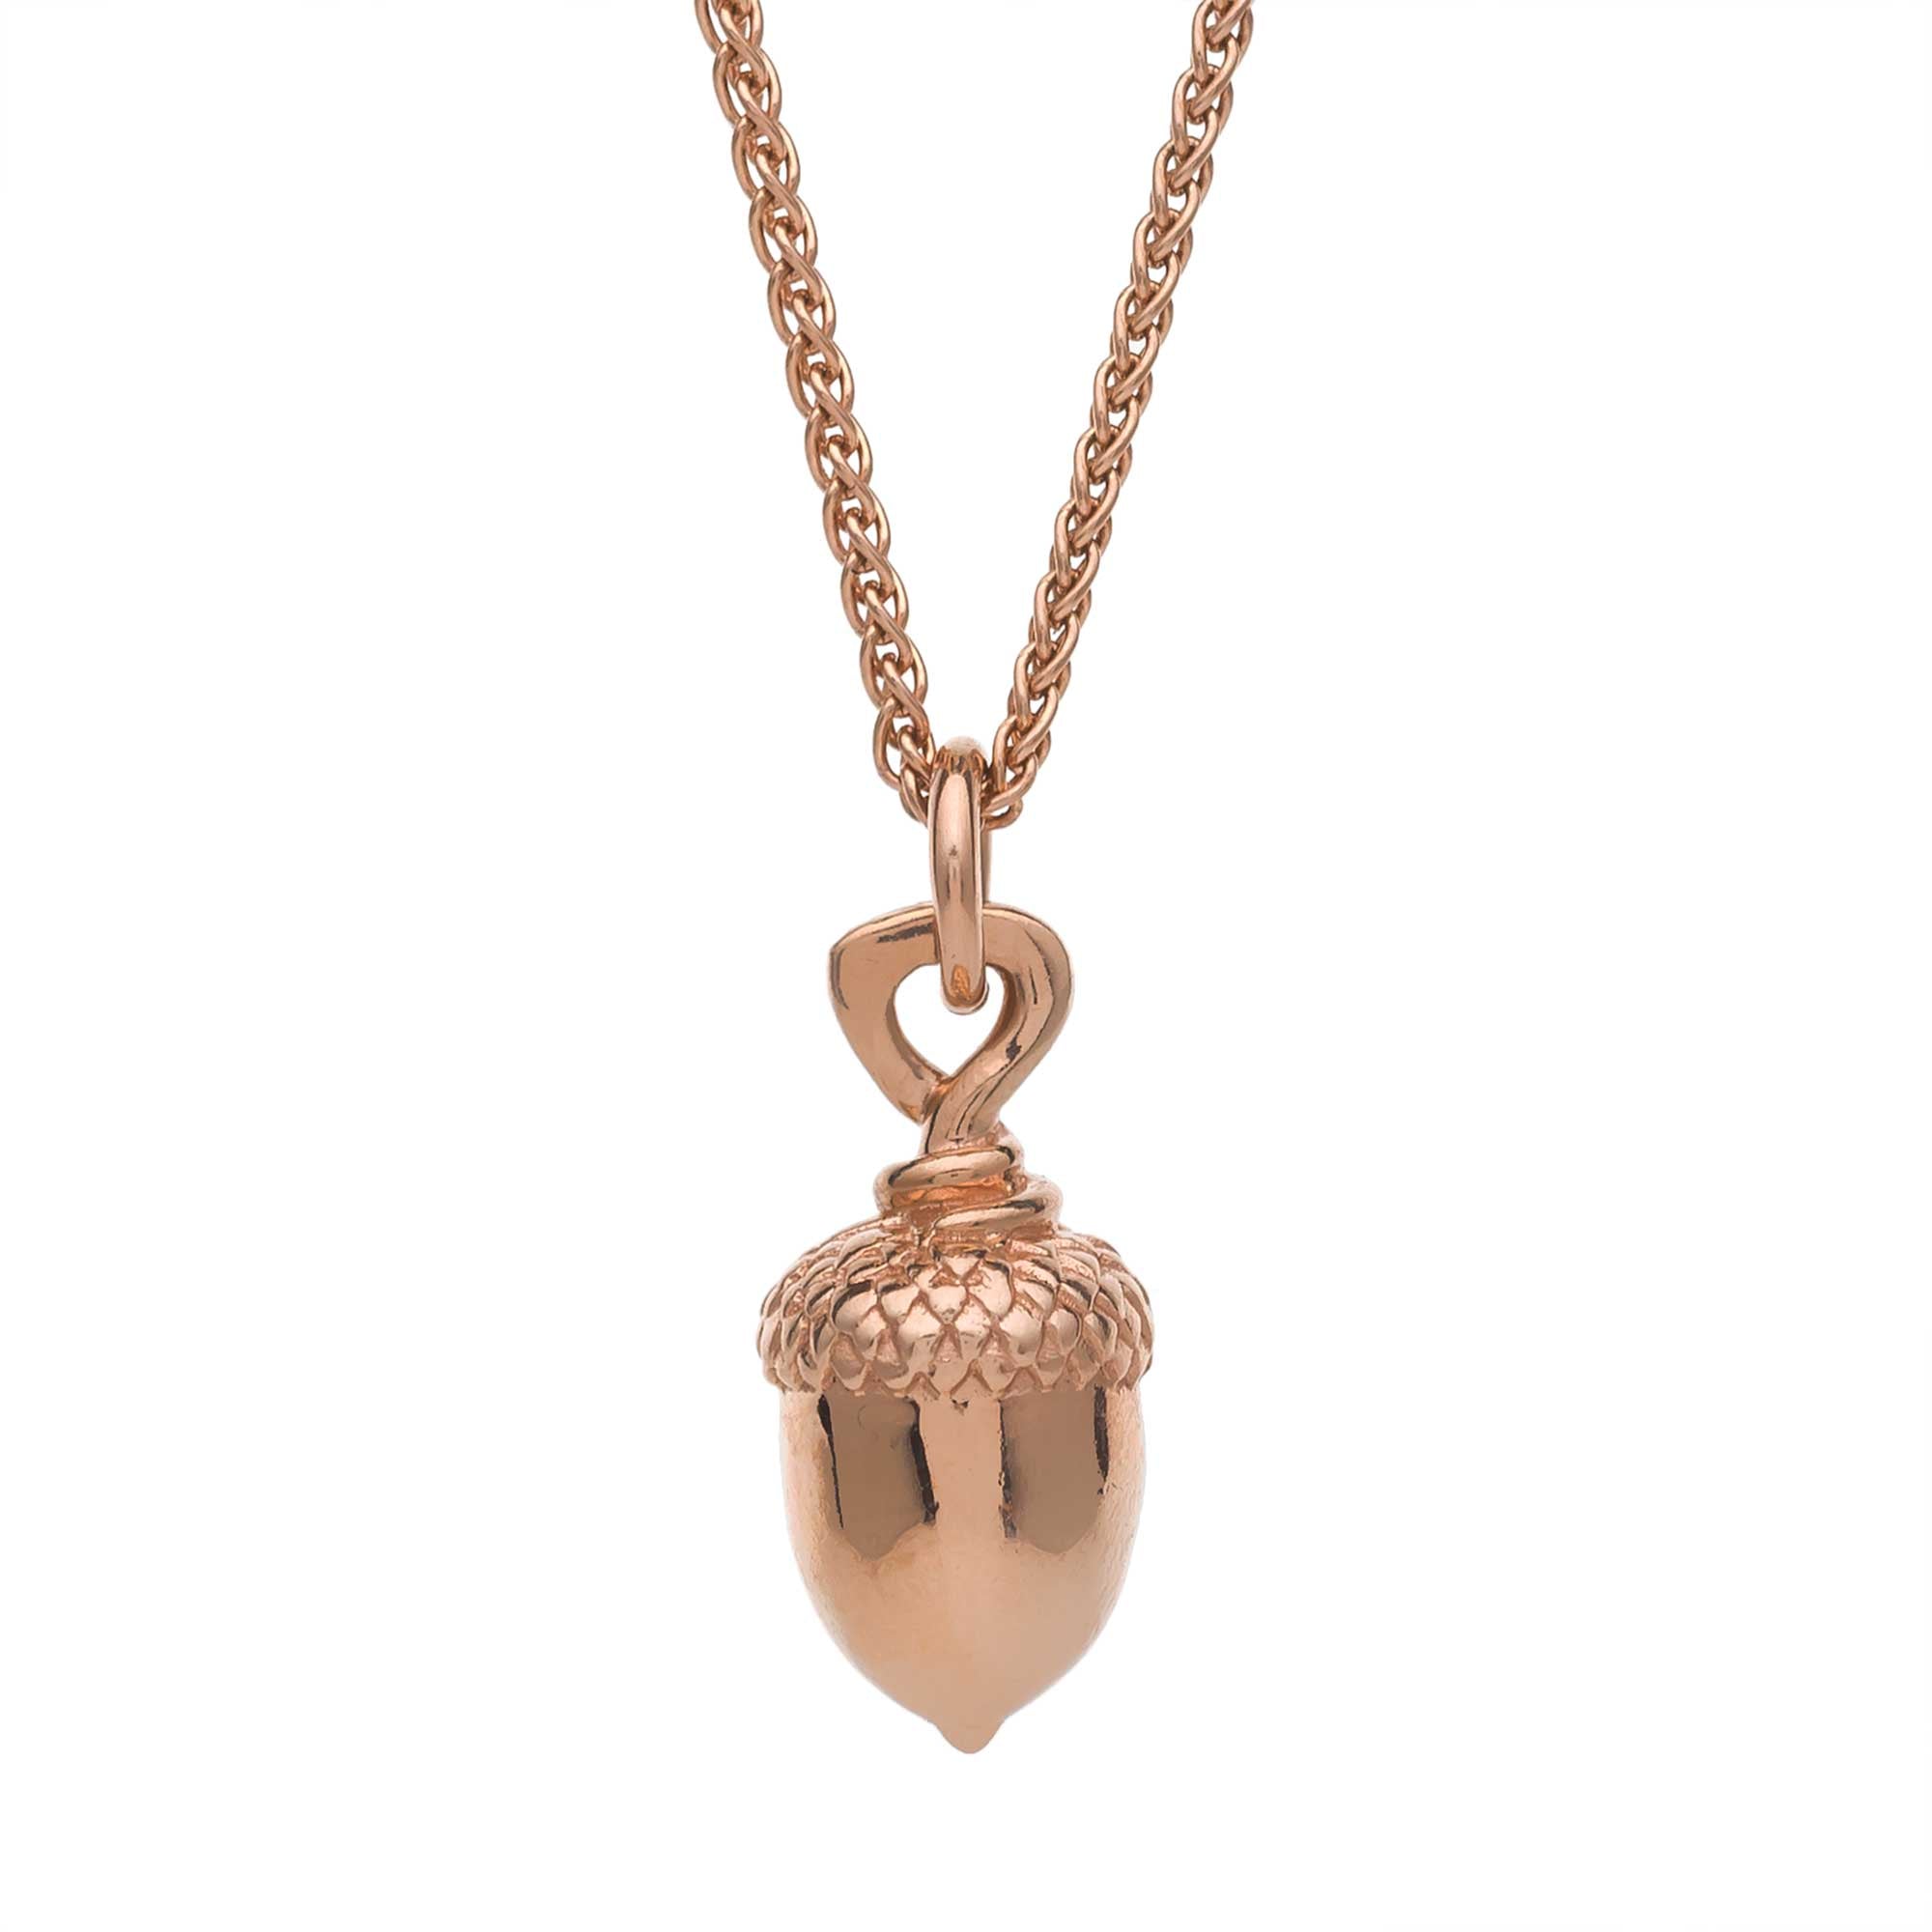 Scarlett Jewellery's Solid Rose Gold Acorn Necklace - Classic Sophistication